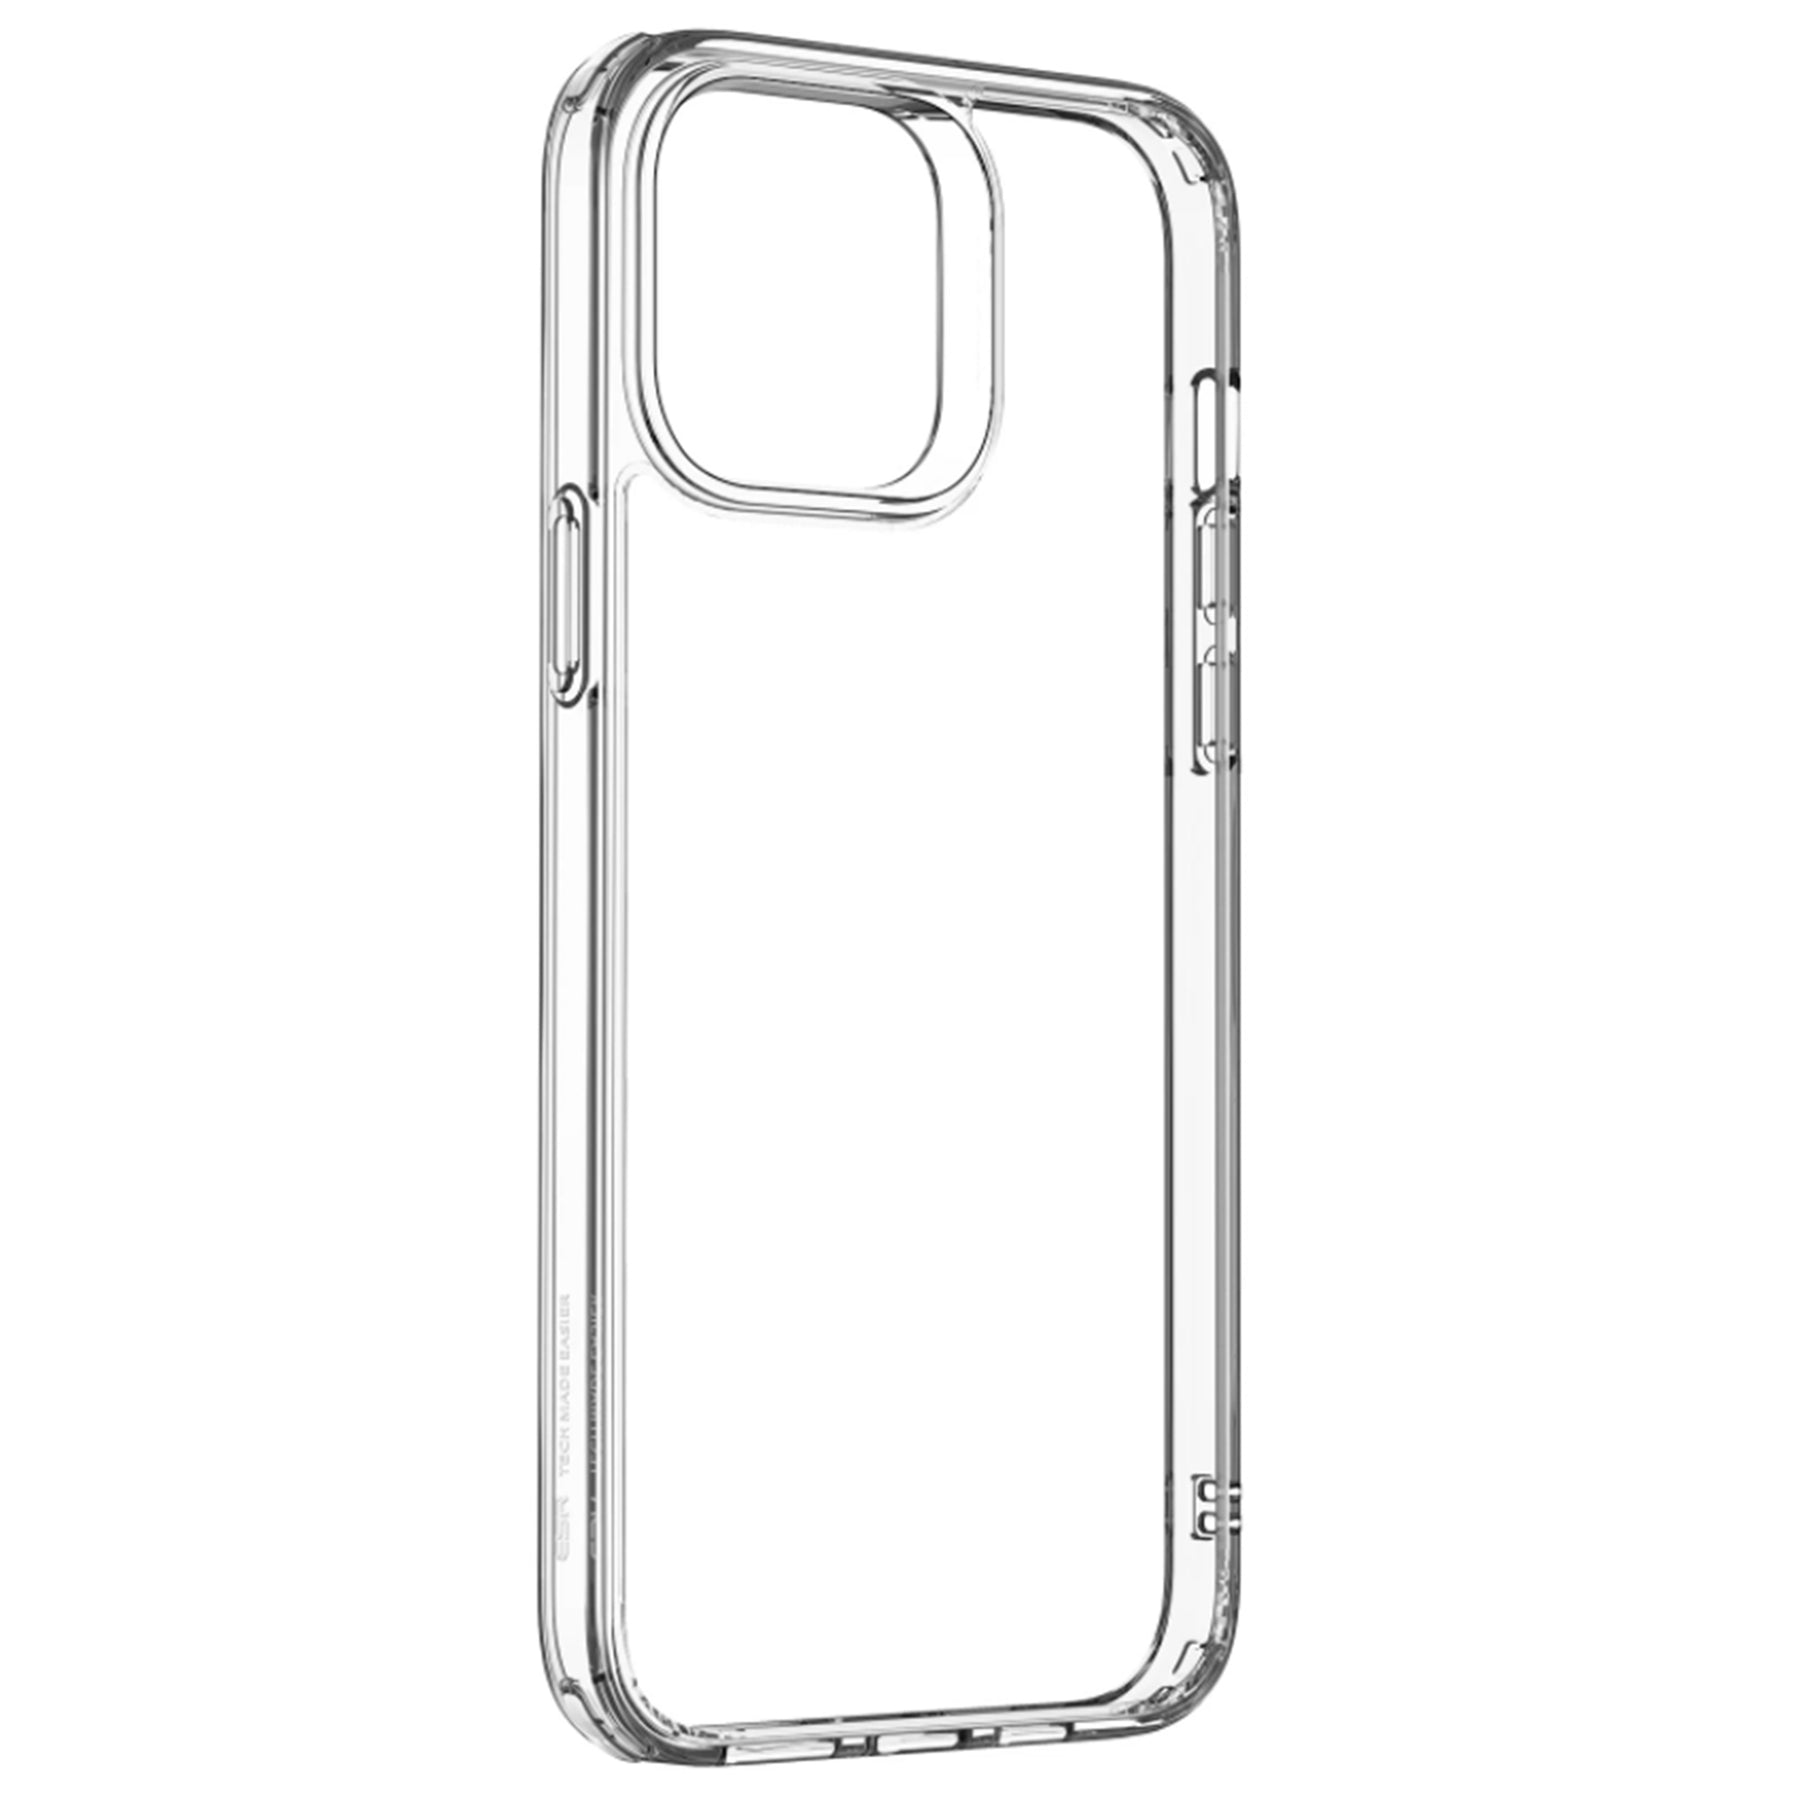 Apple iPhone 13 Pro, Protection Case, Color Clear.